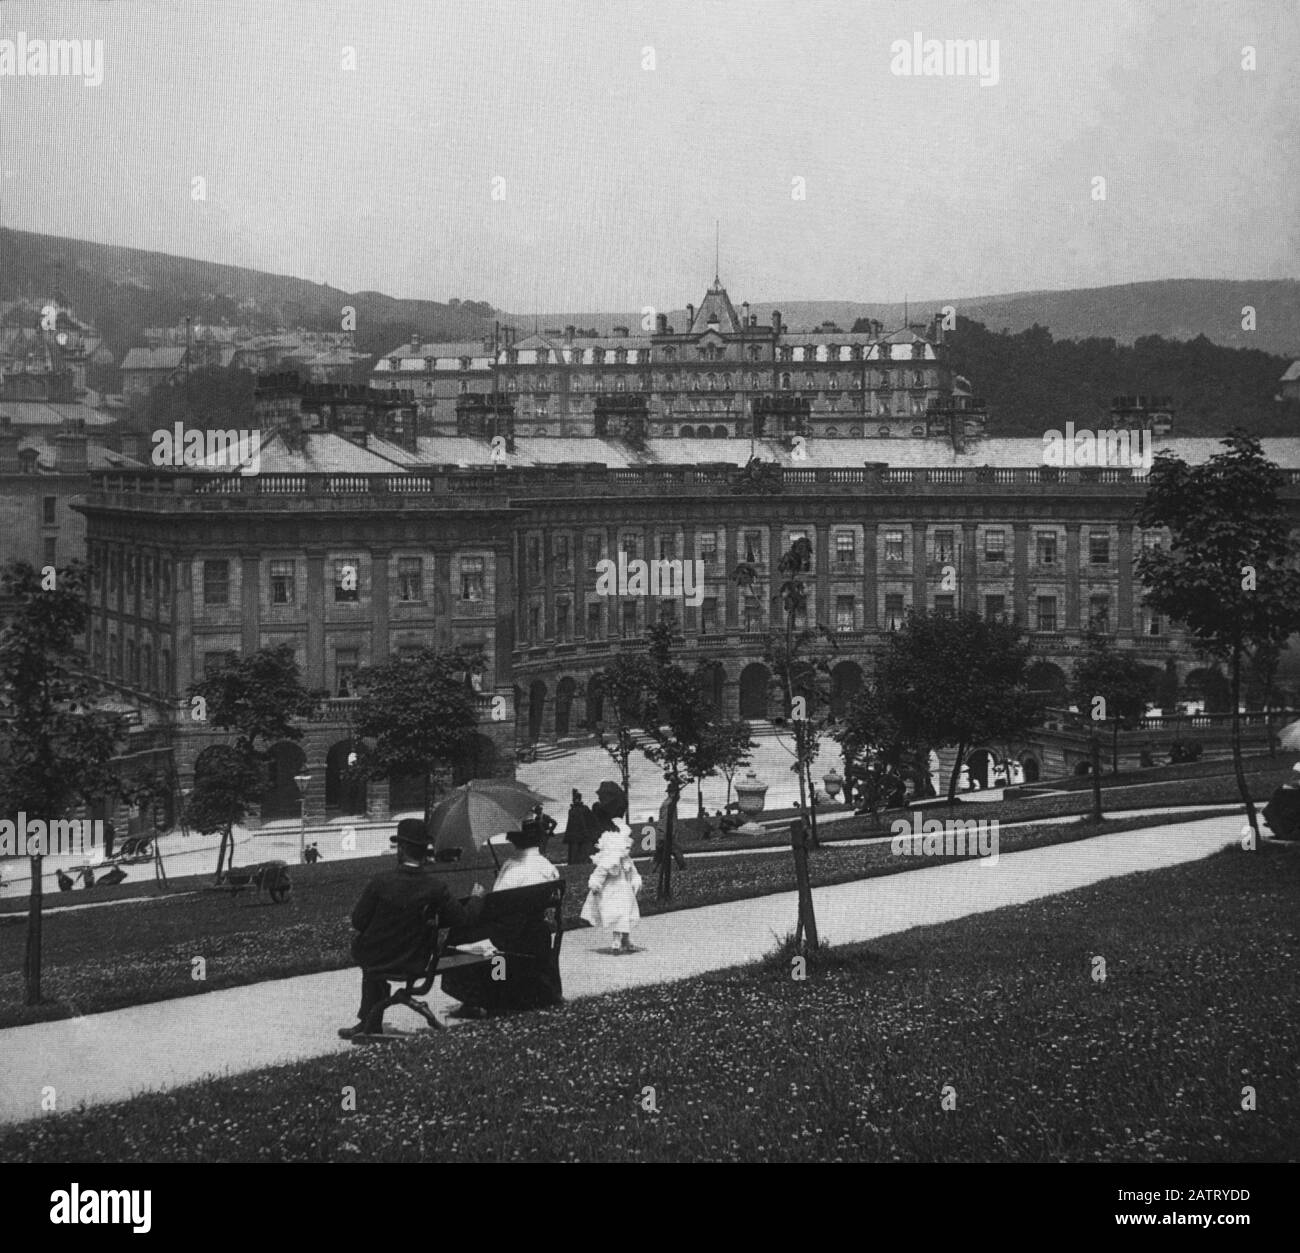 Buxton Crescent & Thermal Spa Hotel & Palace Hotel during the Victorian period c1890, Victorians in front of the Bath House, antique old glass magic lantern slide picture. The newly renovated hotel is due to open in 2020 creating a northern capital for health and wellbeing. Antique Magic Lantern Slide.  Original photographer unknown, copyright period expired.  Digital photography, restoration, editing copyright © Doug Blane. Stock Photo